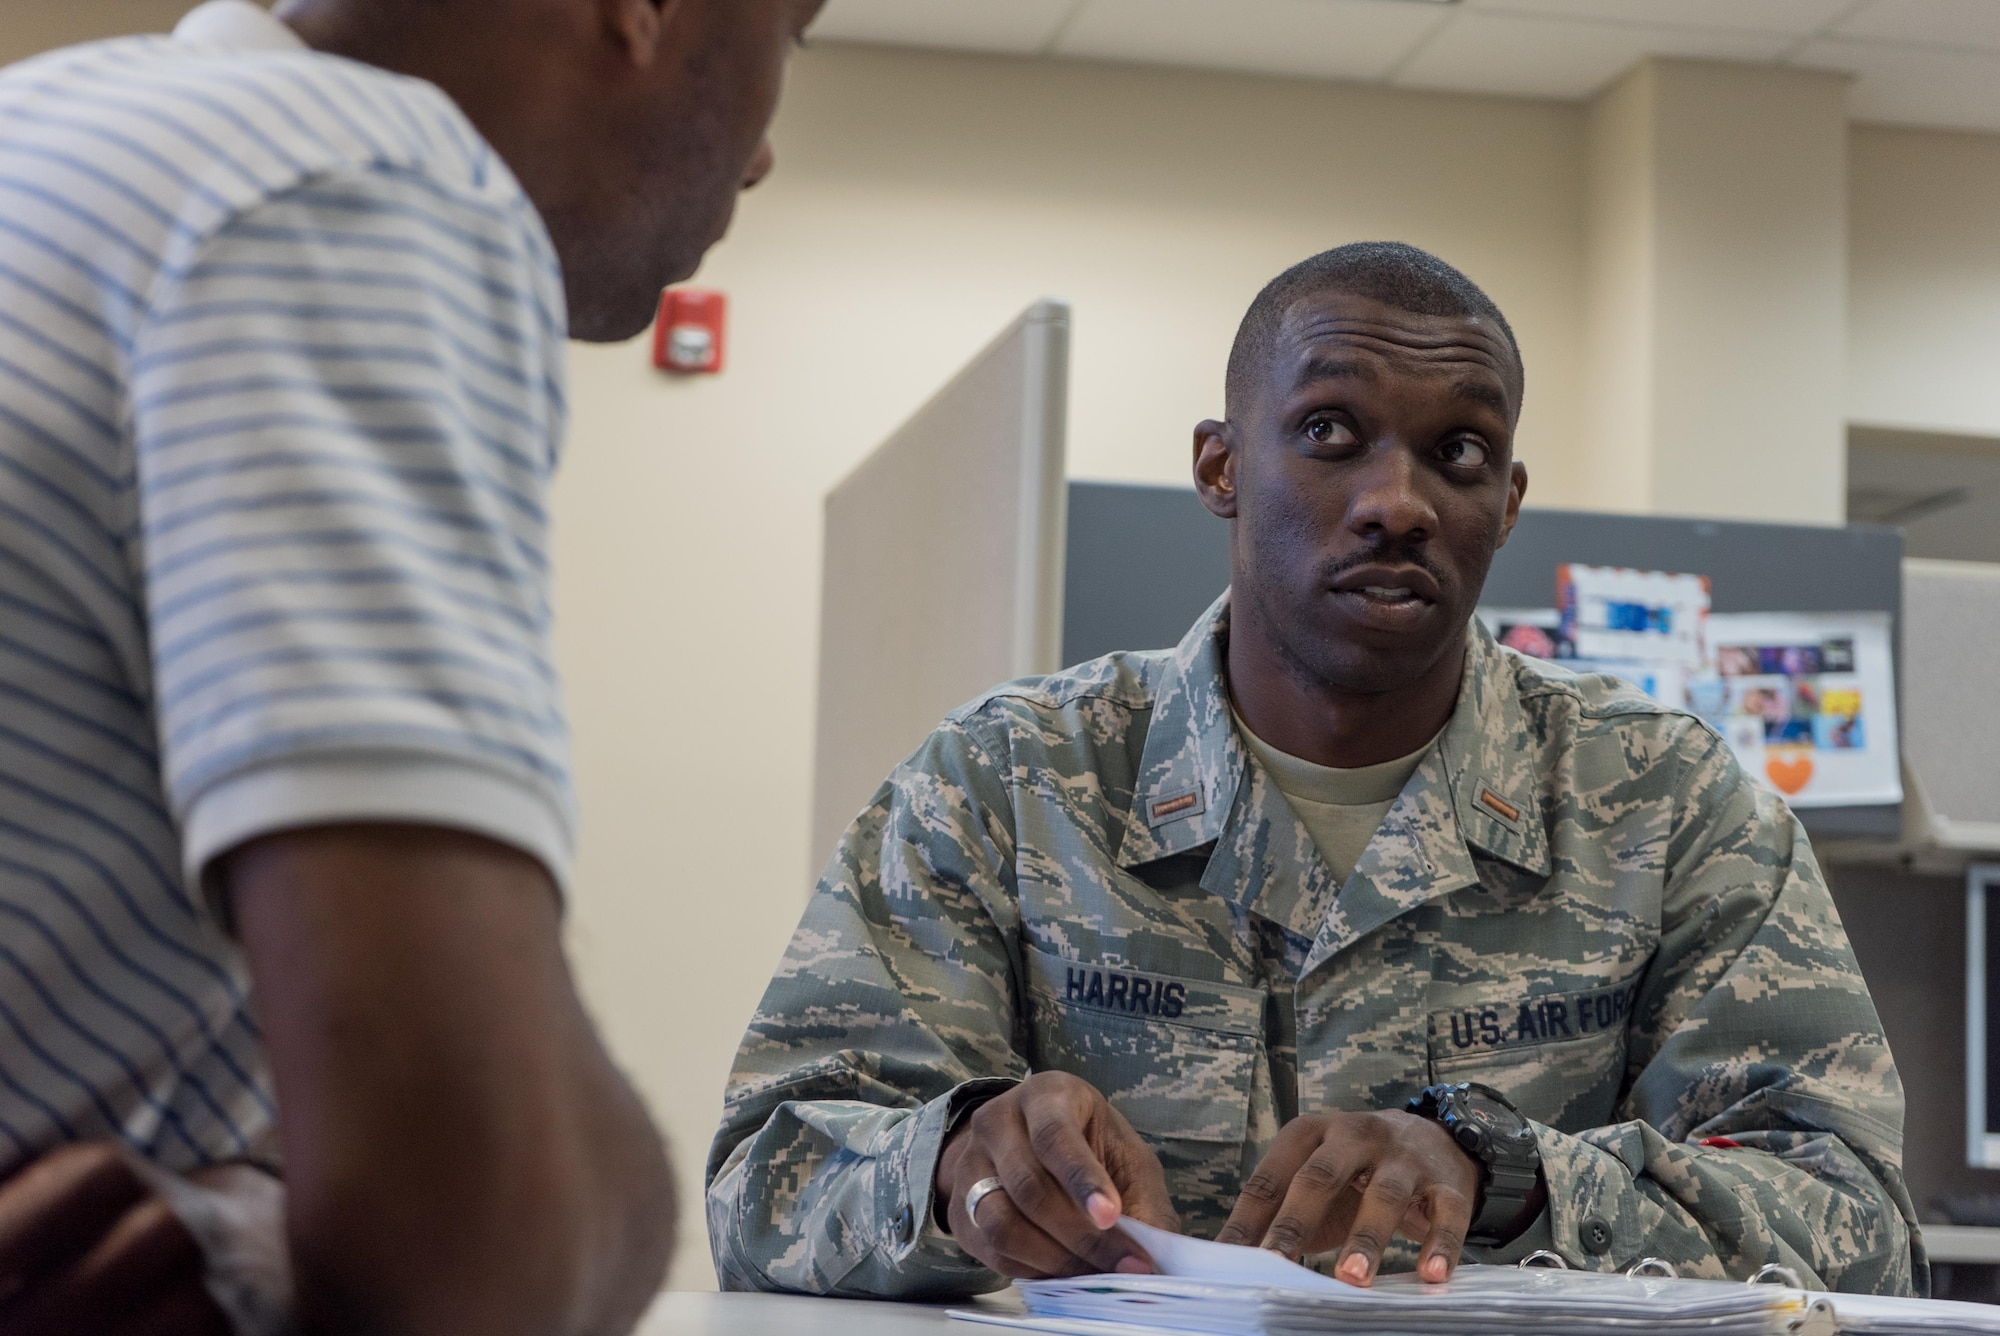 Second Lt. D’Anthony Harris, 413th Aeromedical Staging Squadron medical readiness officer, speaks about unit training with Walter Ware Jr., 413th ASTS in-service trainer, April 18, 2017, at Robins Air Force Base, Georgia. Harris is also a master resiliency trainer with the Air Force Reserve Yellow Ribbon Program. (U.S. Air Force photo by Jamal D. Sutter)